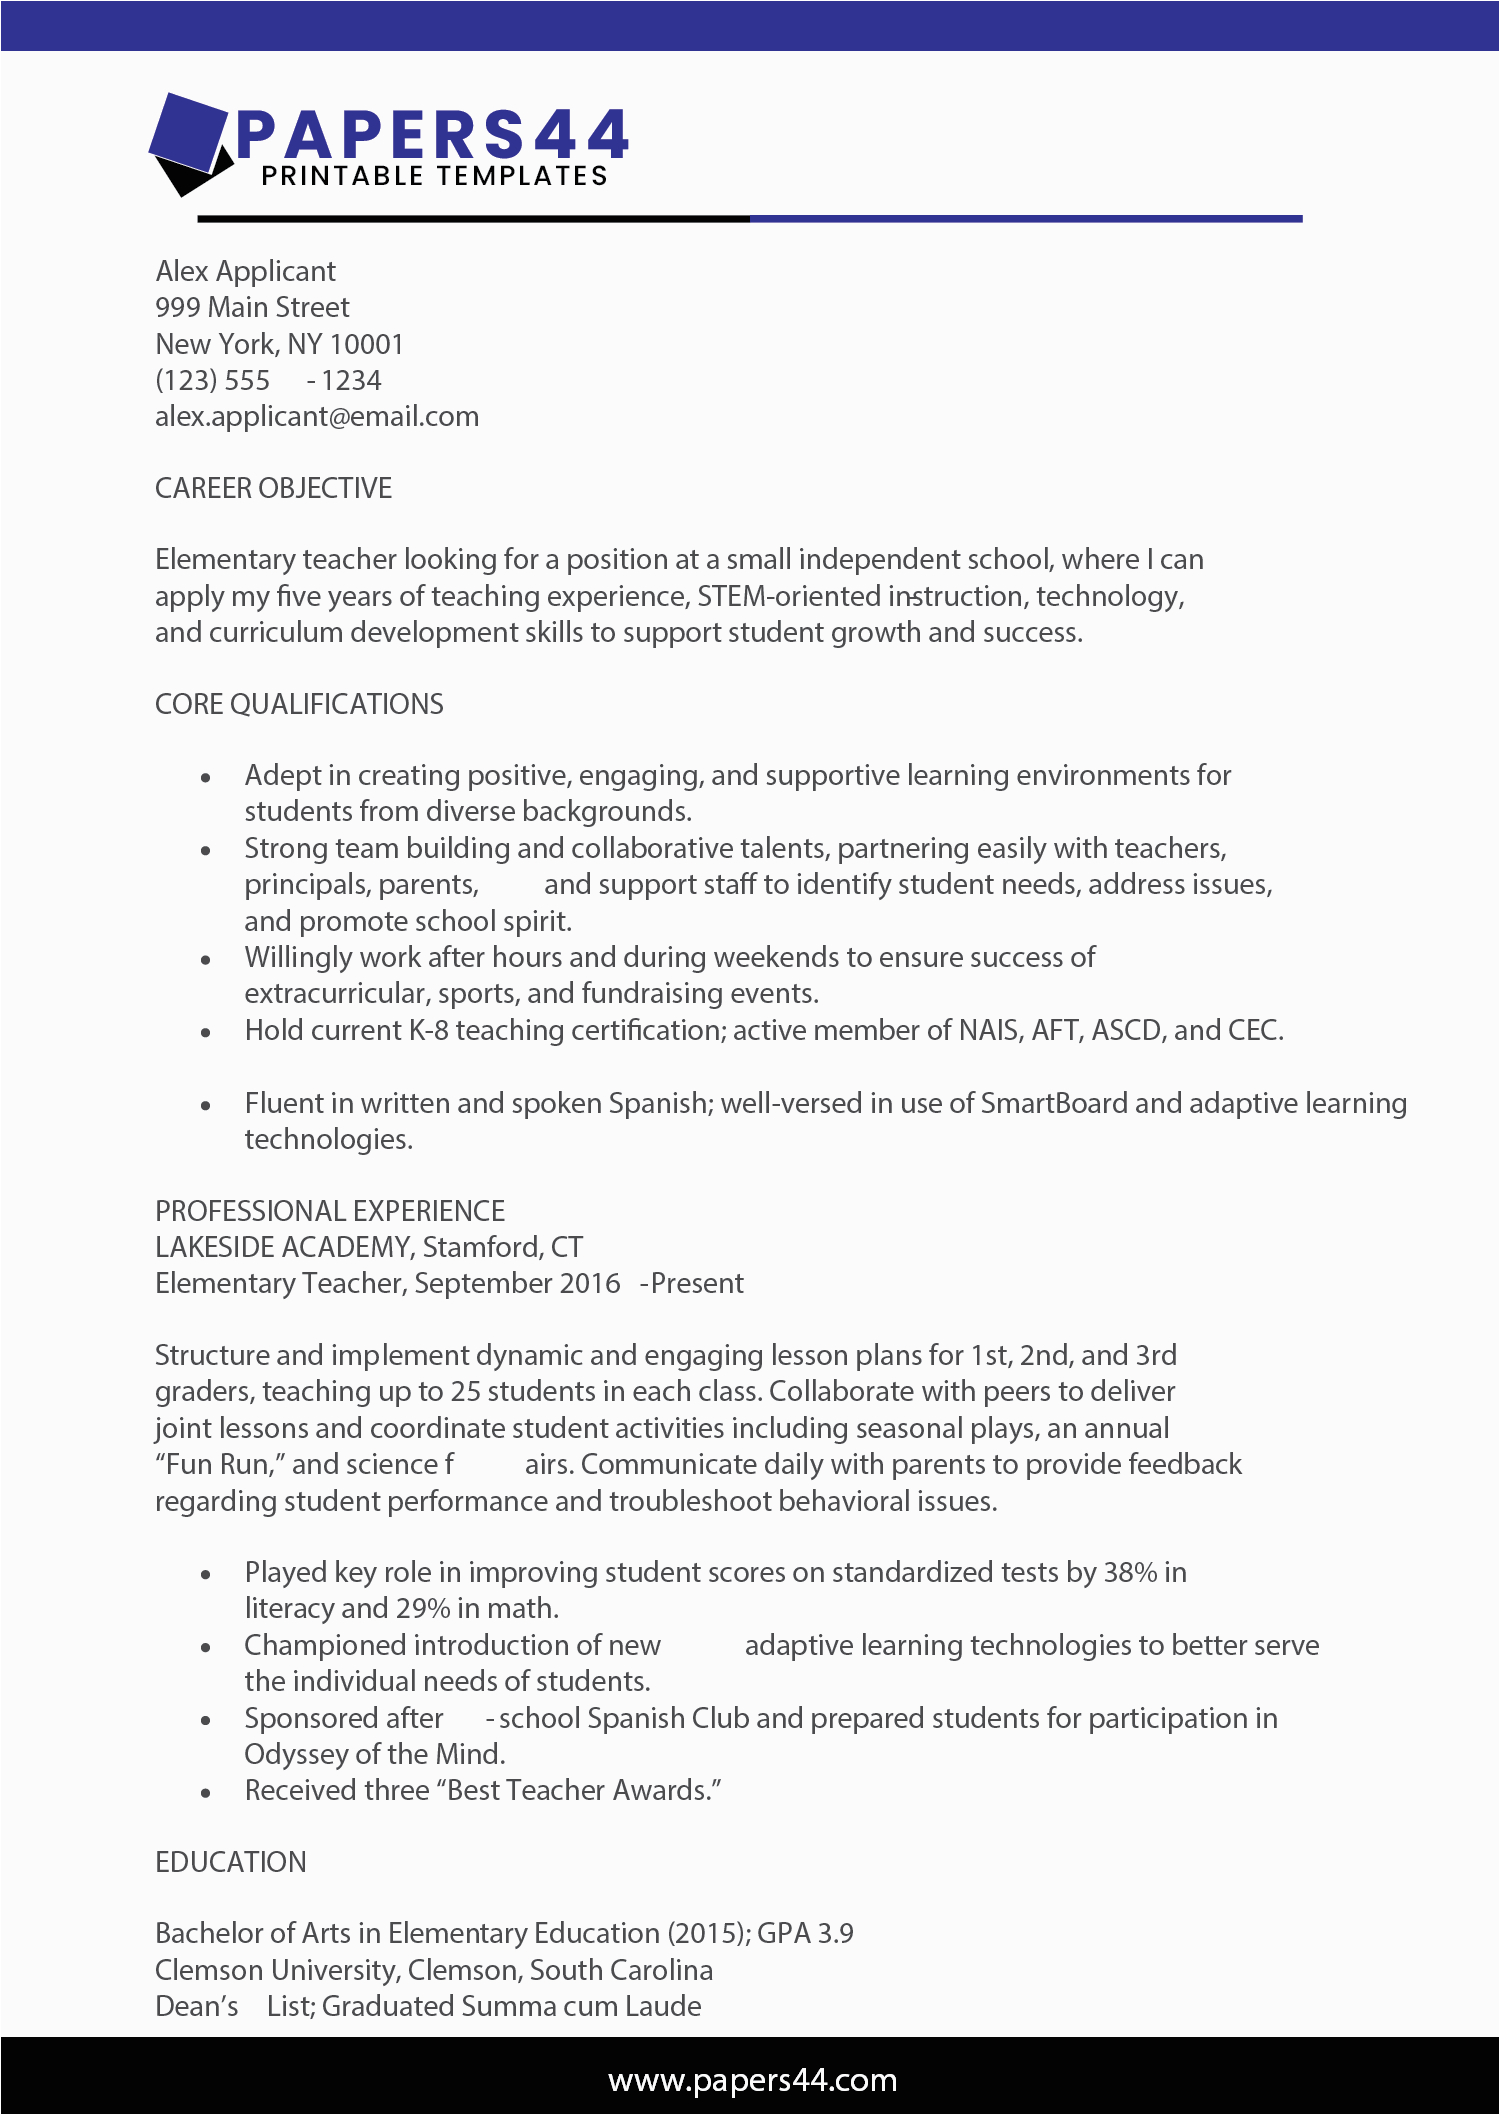 Resume Objective Sample for It Professional Professional Resume Objective Templates